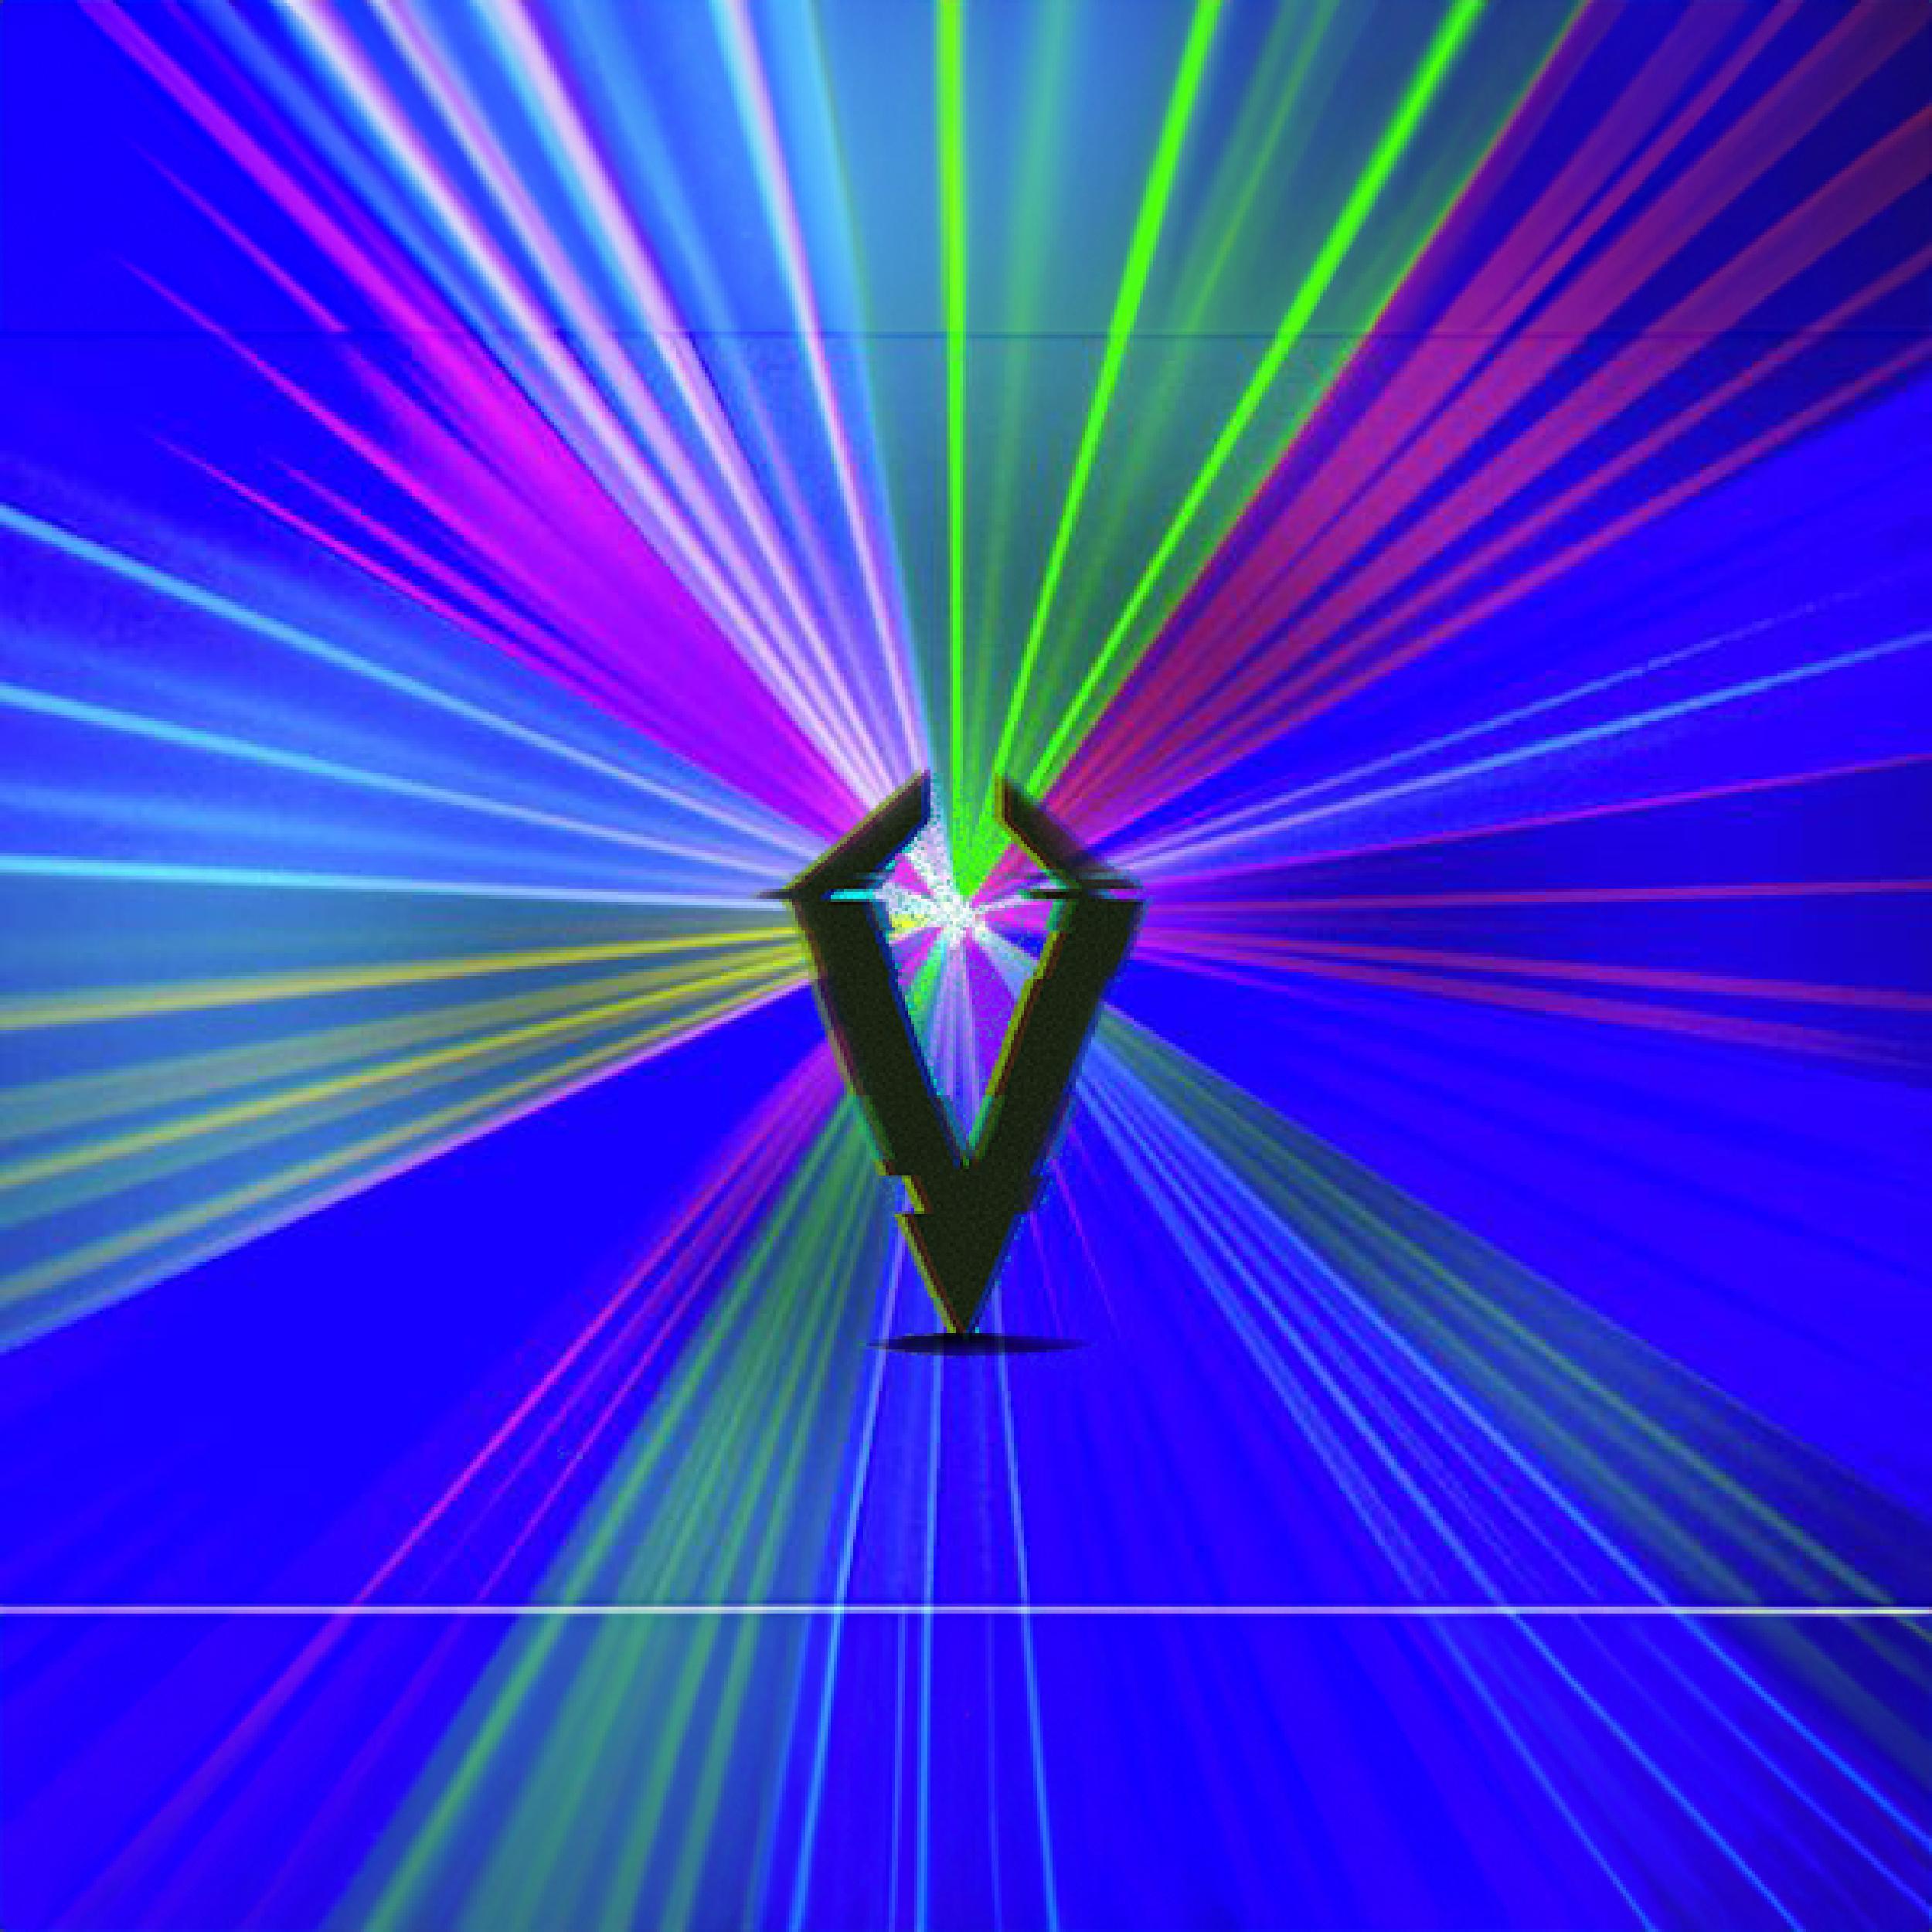 Photo of the laser beams created by the VIRES laser. There is also an alternative VIRES logo in the center of the picture.